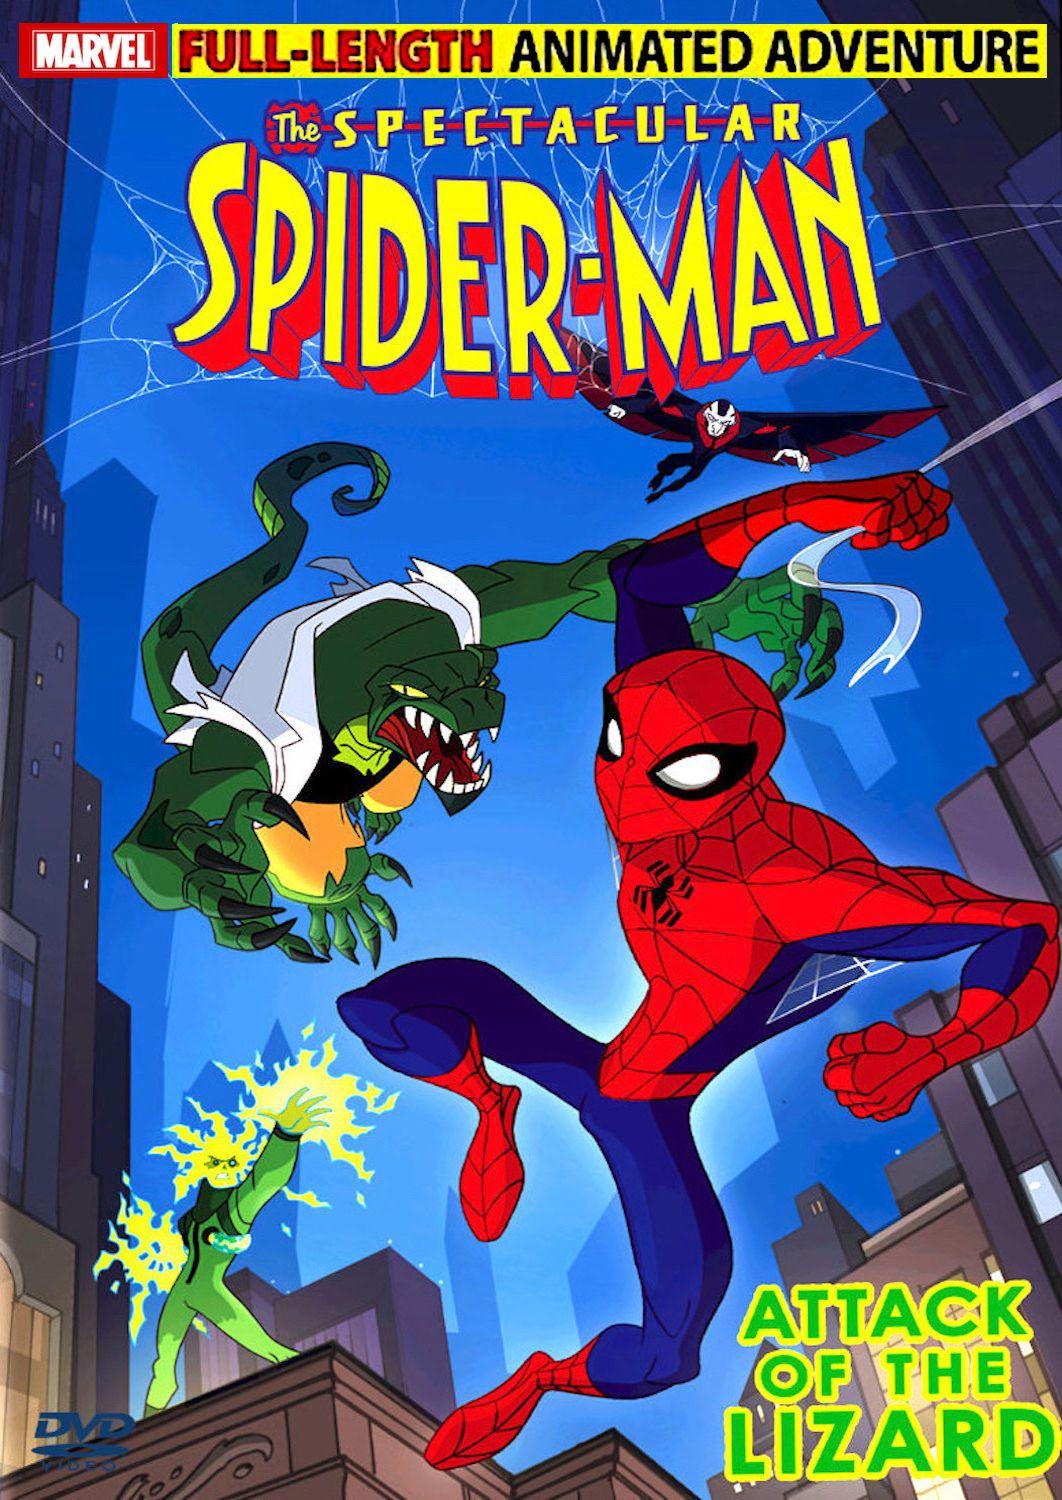 THE SPECTACULAR SPIDER MAN ATTACK OF THE LIZARD DVD. SPIDER MAN